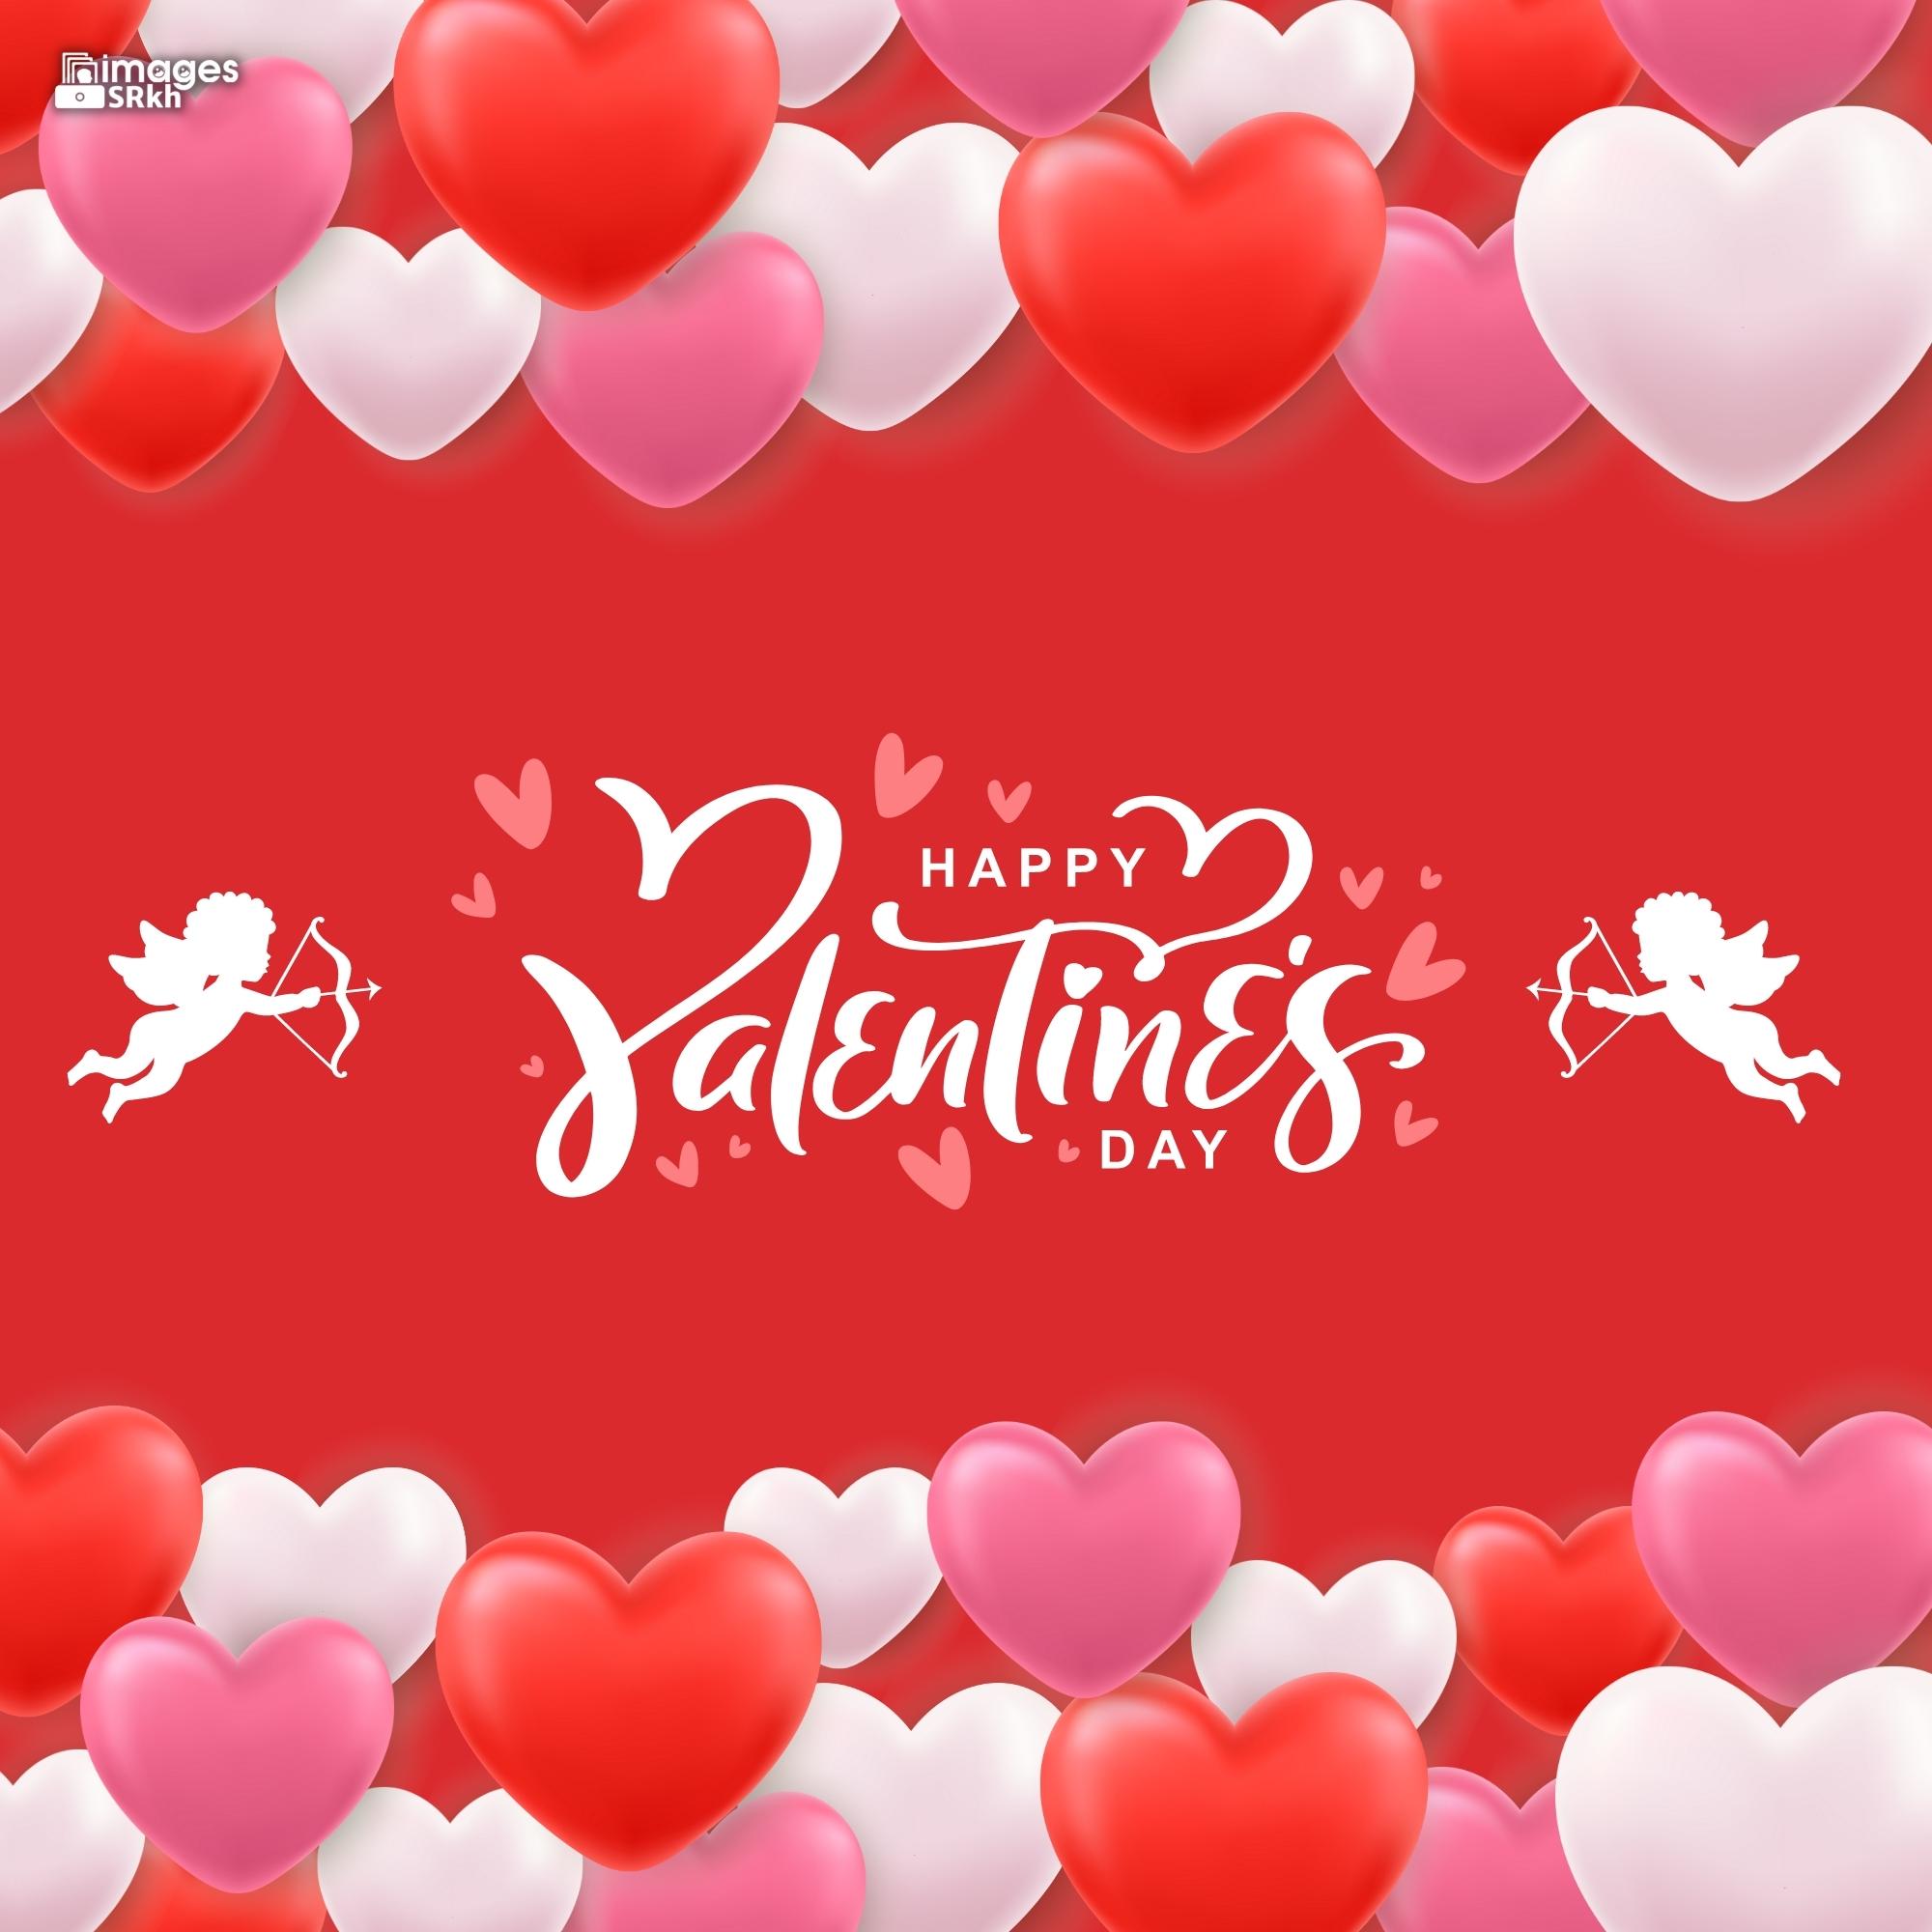 Happy Valentines Day | 423 | PREMIUM IMAGES | Wishes for Love